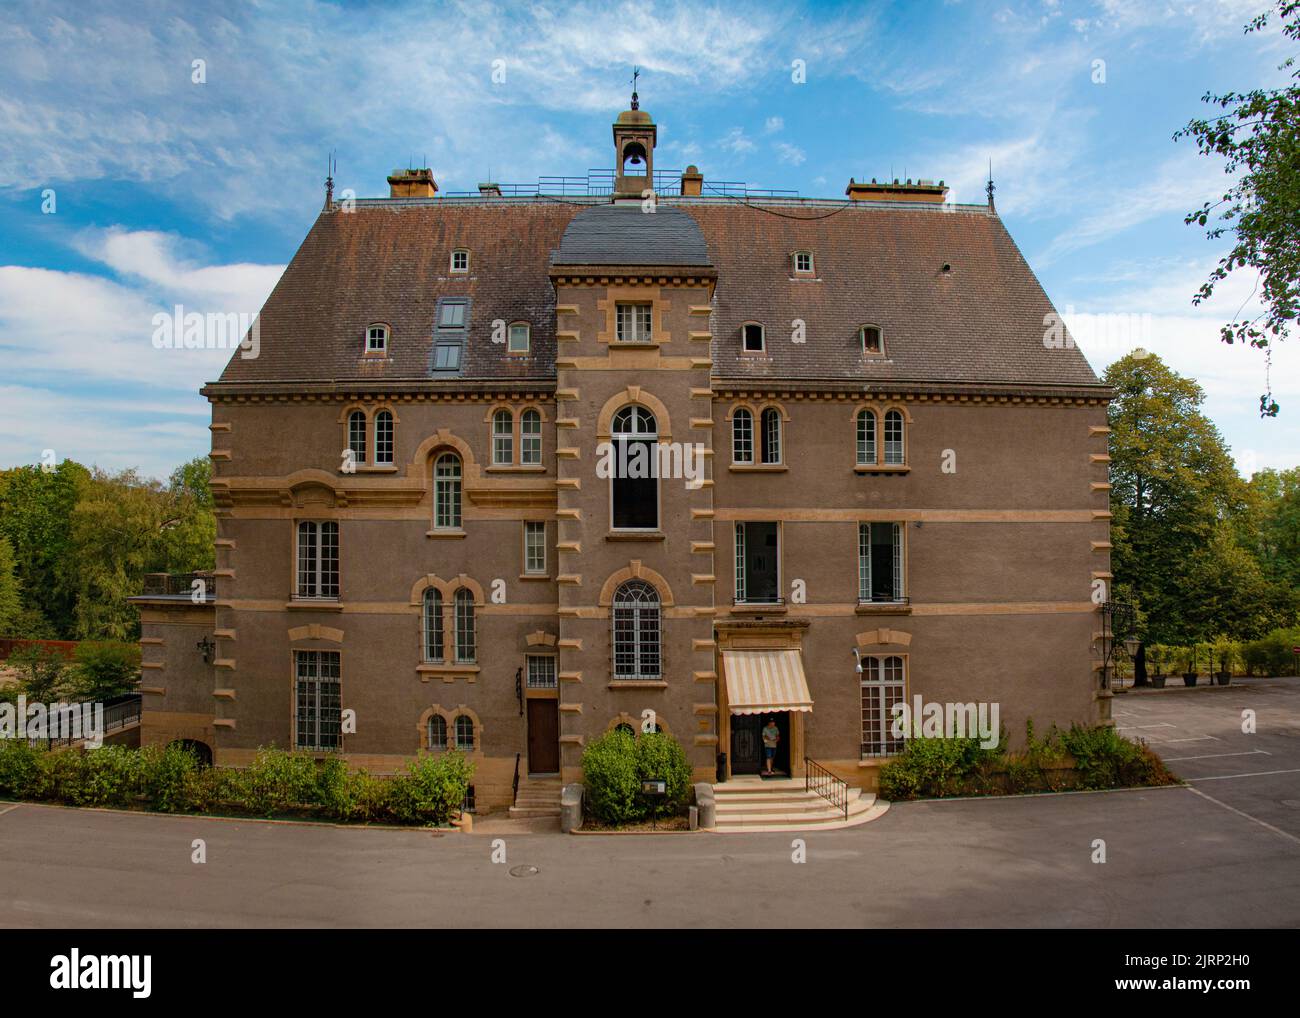 The beautiful and imposing Ö Chateau Hotel and Restaurant, Hayange, France Stock Photo